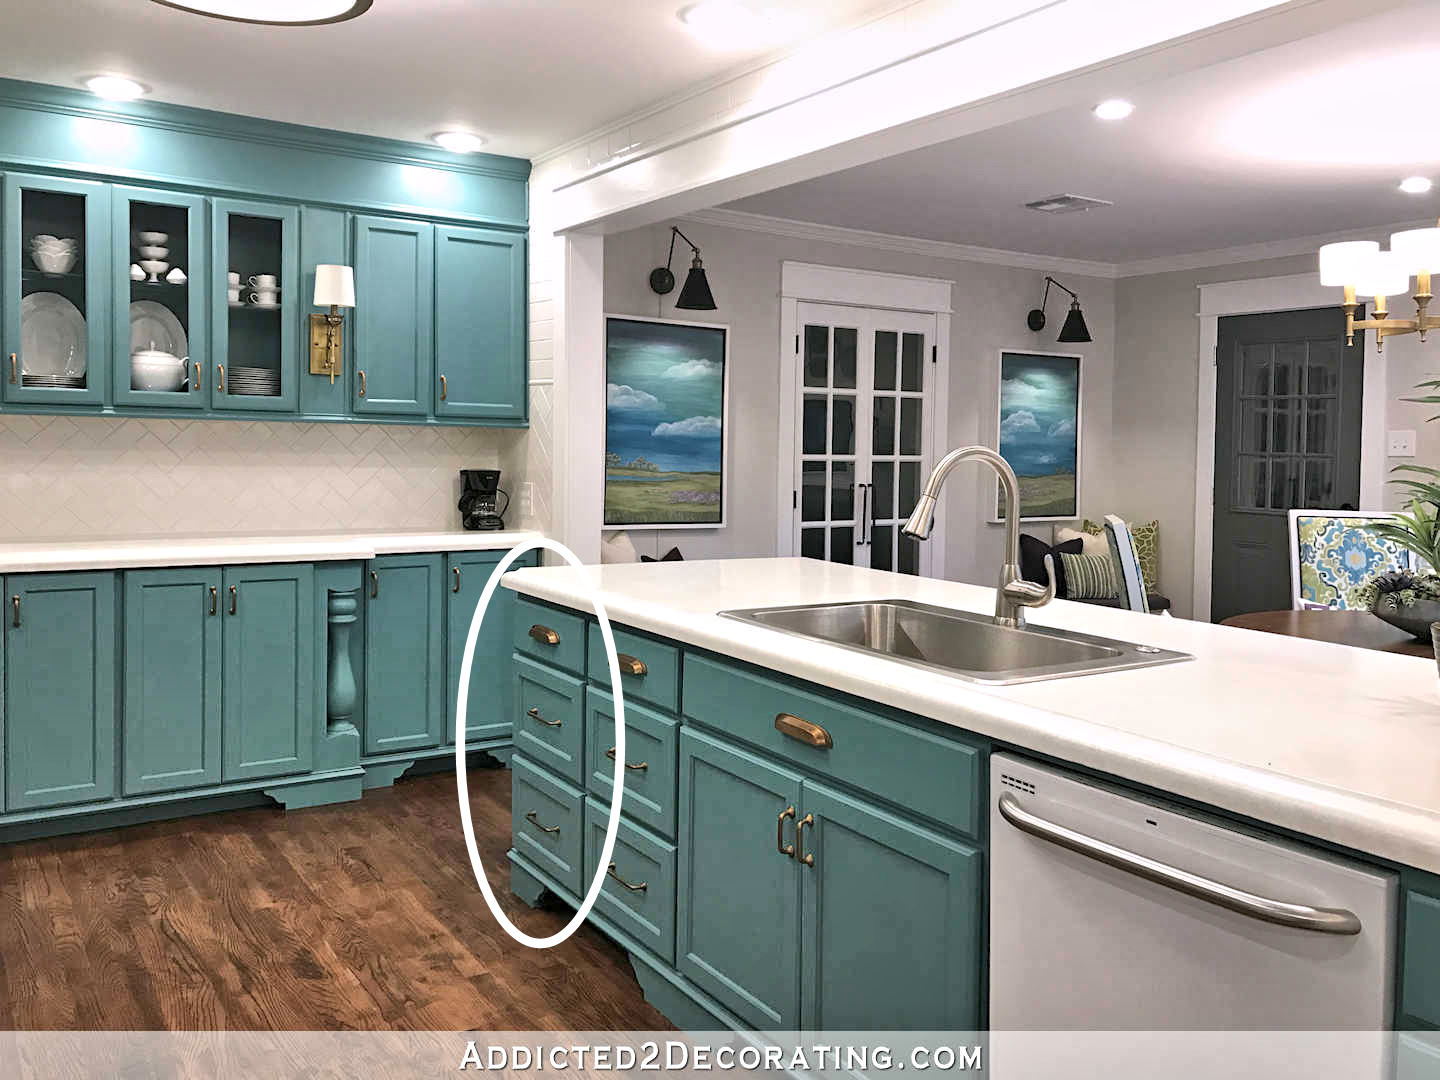 teal kitchen - plan to turn three drawer cabinet into pull out garbage cans